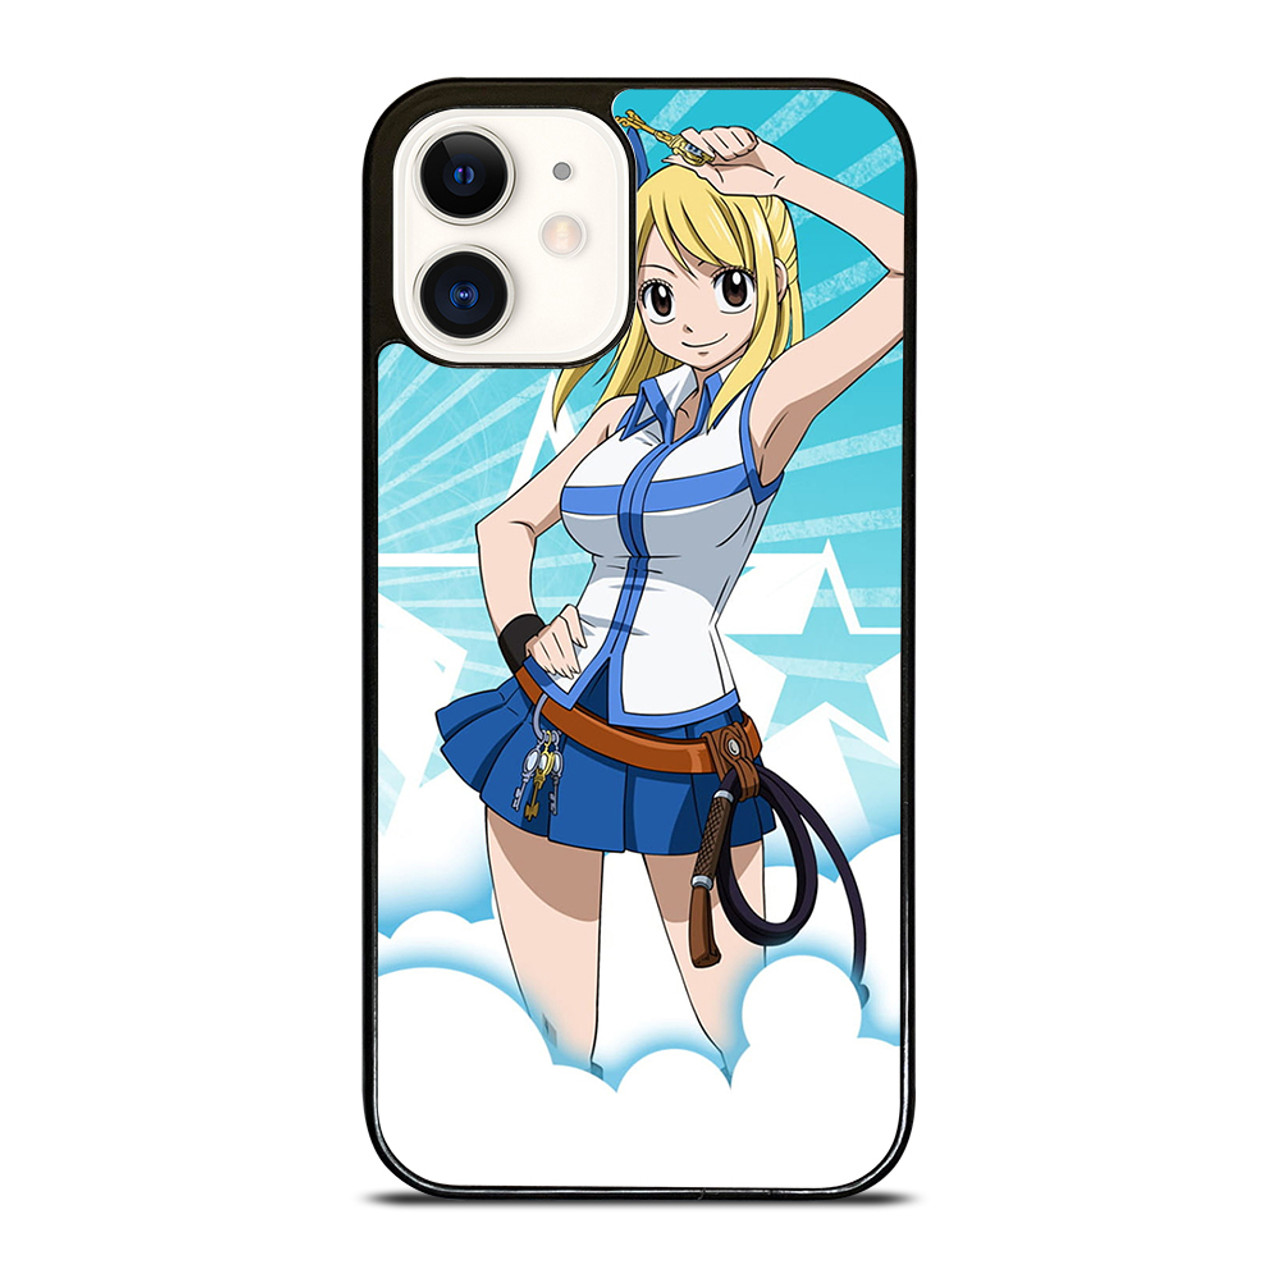 https://cdn11.bigcommerce.com/s-1obwgivpkz/images/stencil/1280x1280/products/180761/206838/LUCY%20HEARTFILIA%20FAIRY%20TAIL%20ANIME%20SEXY__37639.1700074495.jpg?c=1